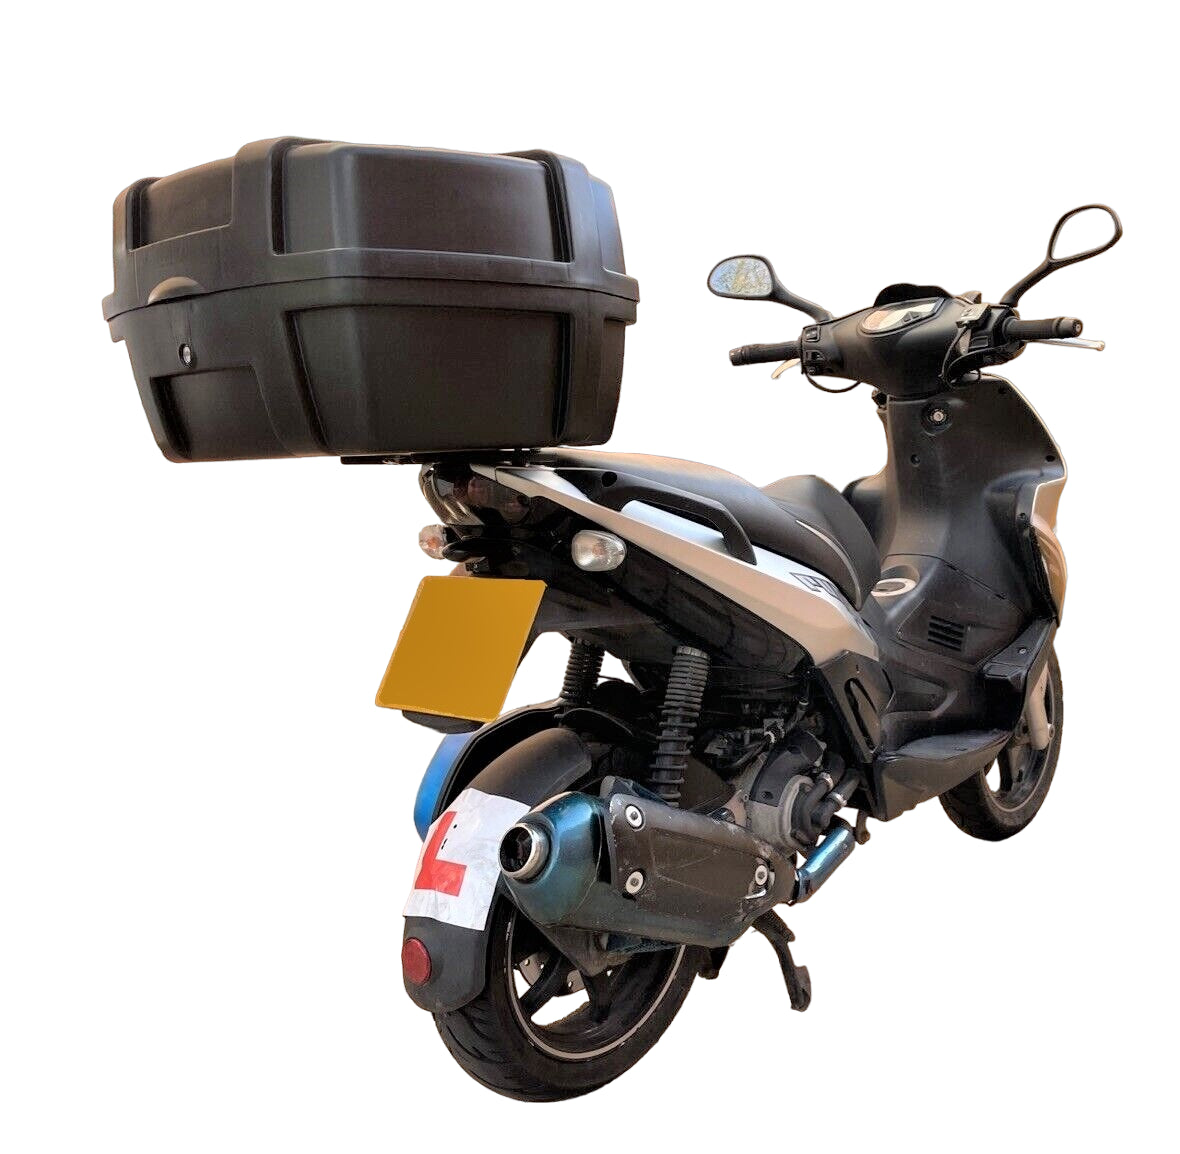 Topbox for motorcycle 52 LT universal DIRECT INSTALLATION WITHOUT FITTING PLATE